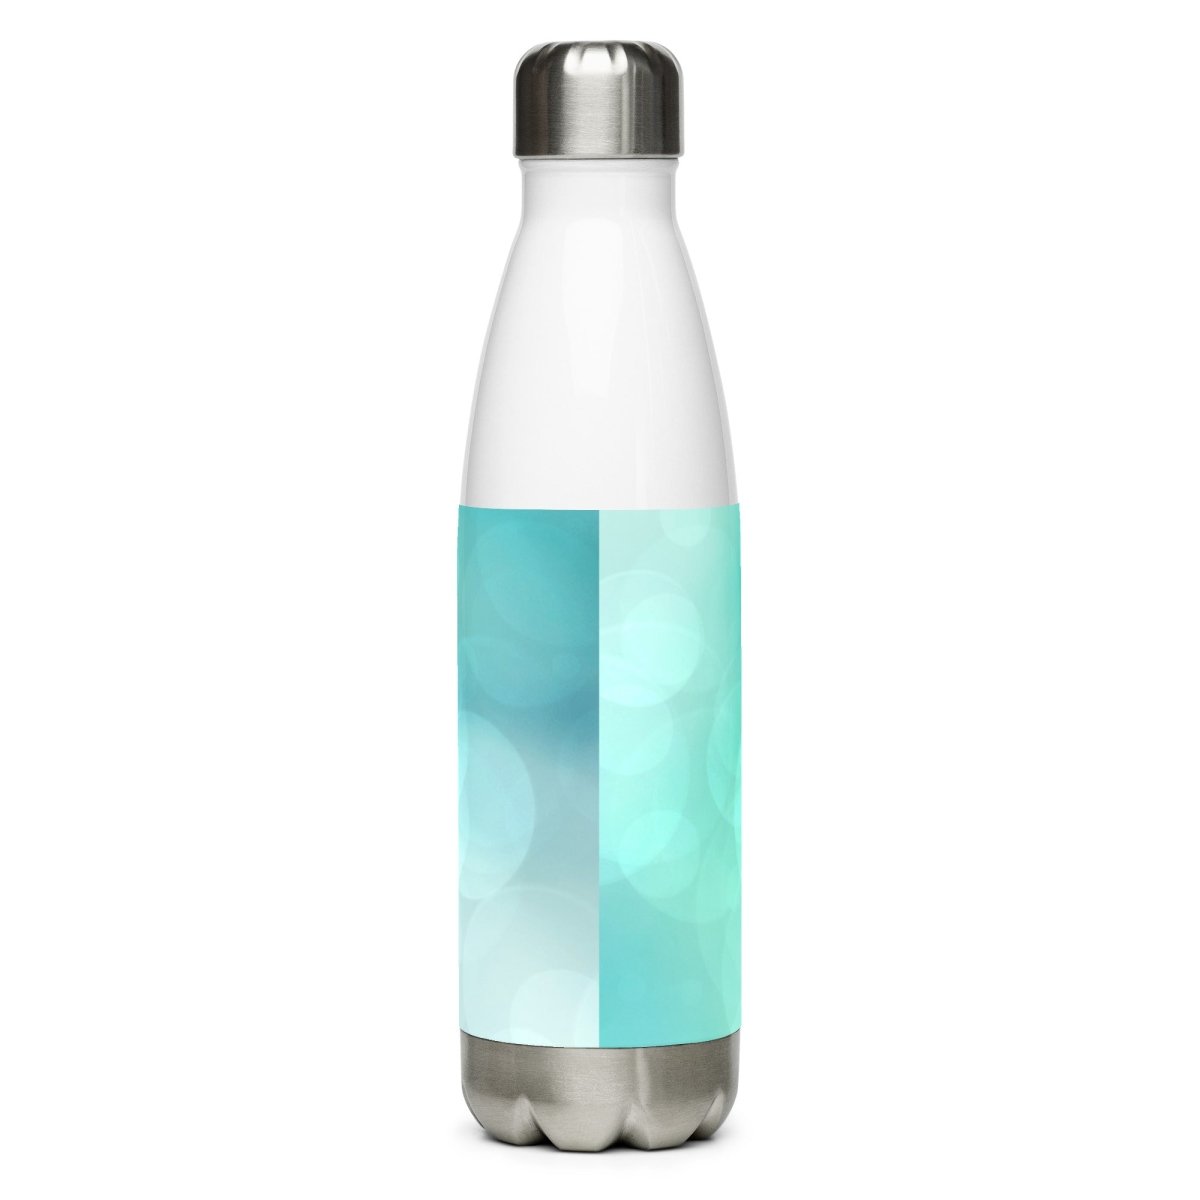 Sefira Stainless Steel Water Bottle | Sefira Home Collection - Sefira Collections